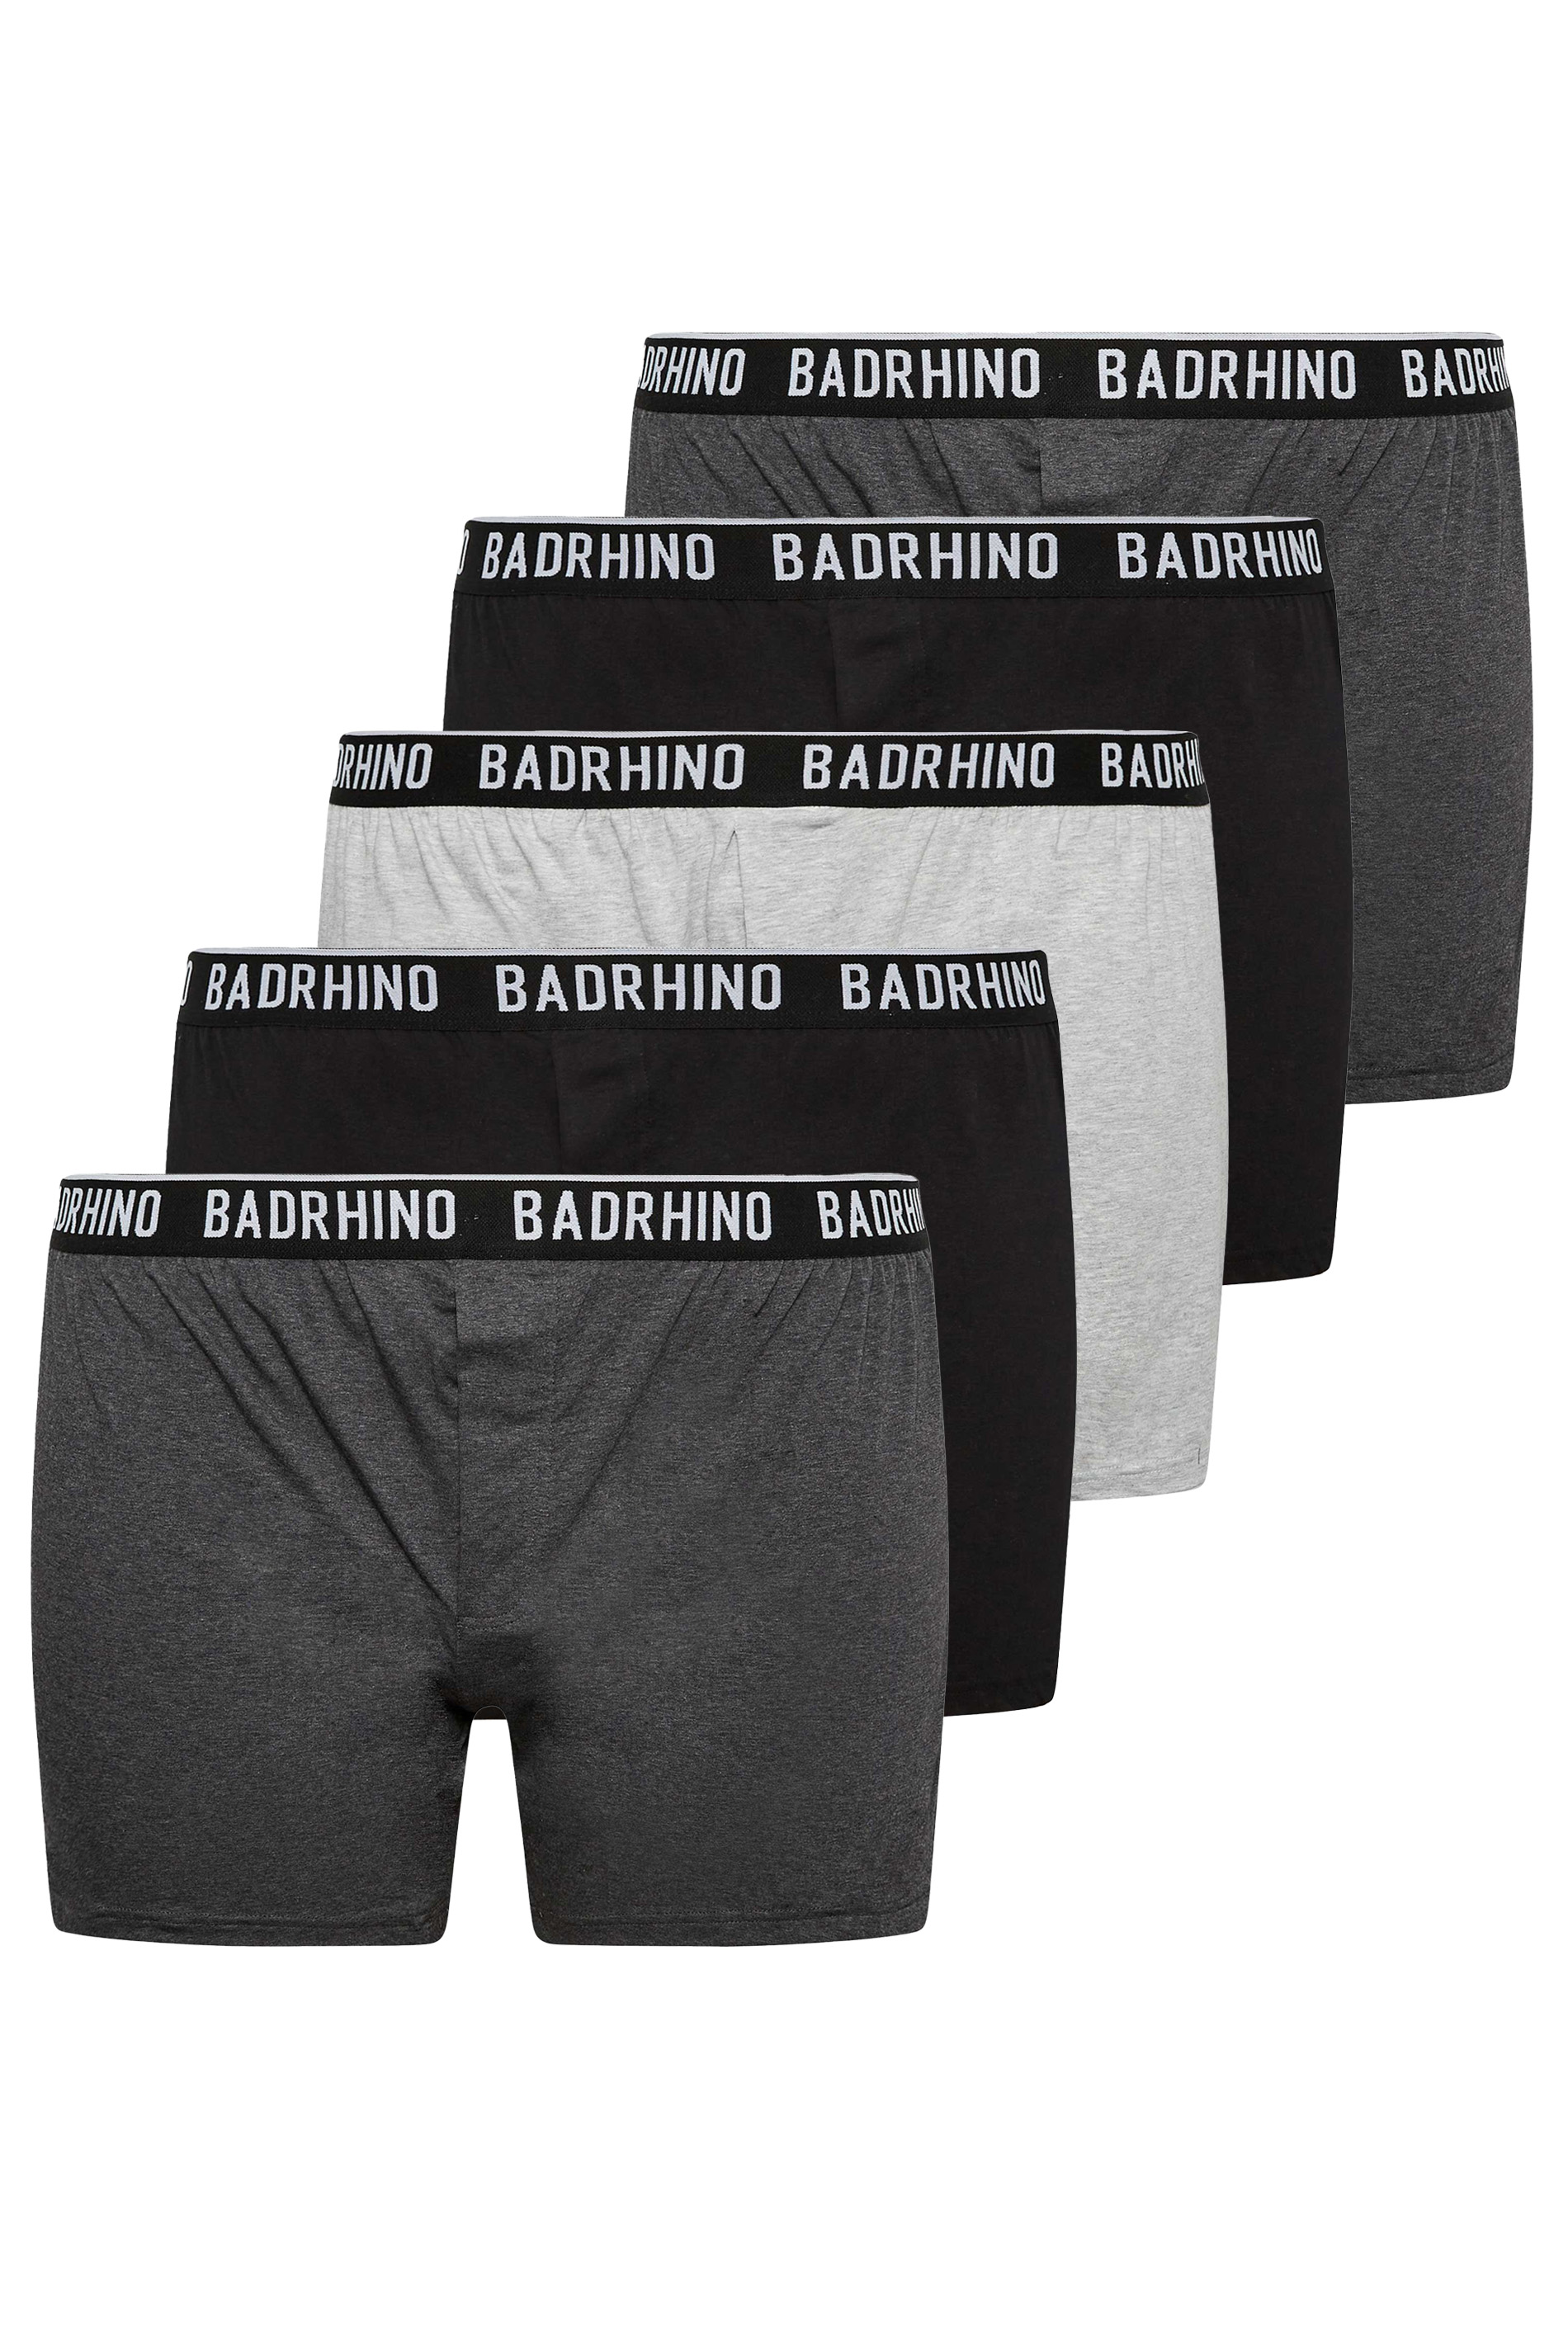 BadRhino Big & Tall 5 PACK Black & Grey Button Up Loose Fit Boxers | BadRhino 3